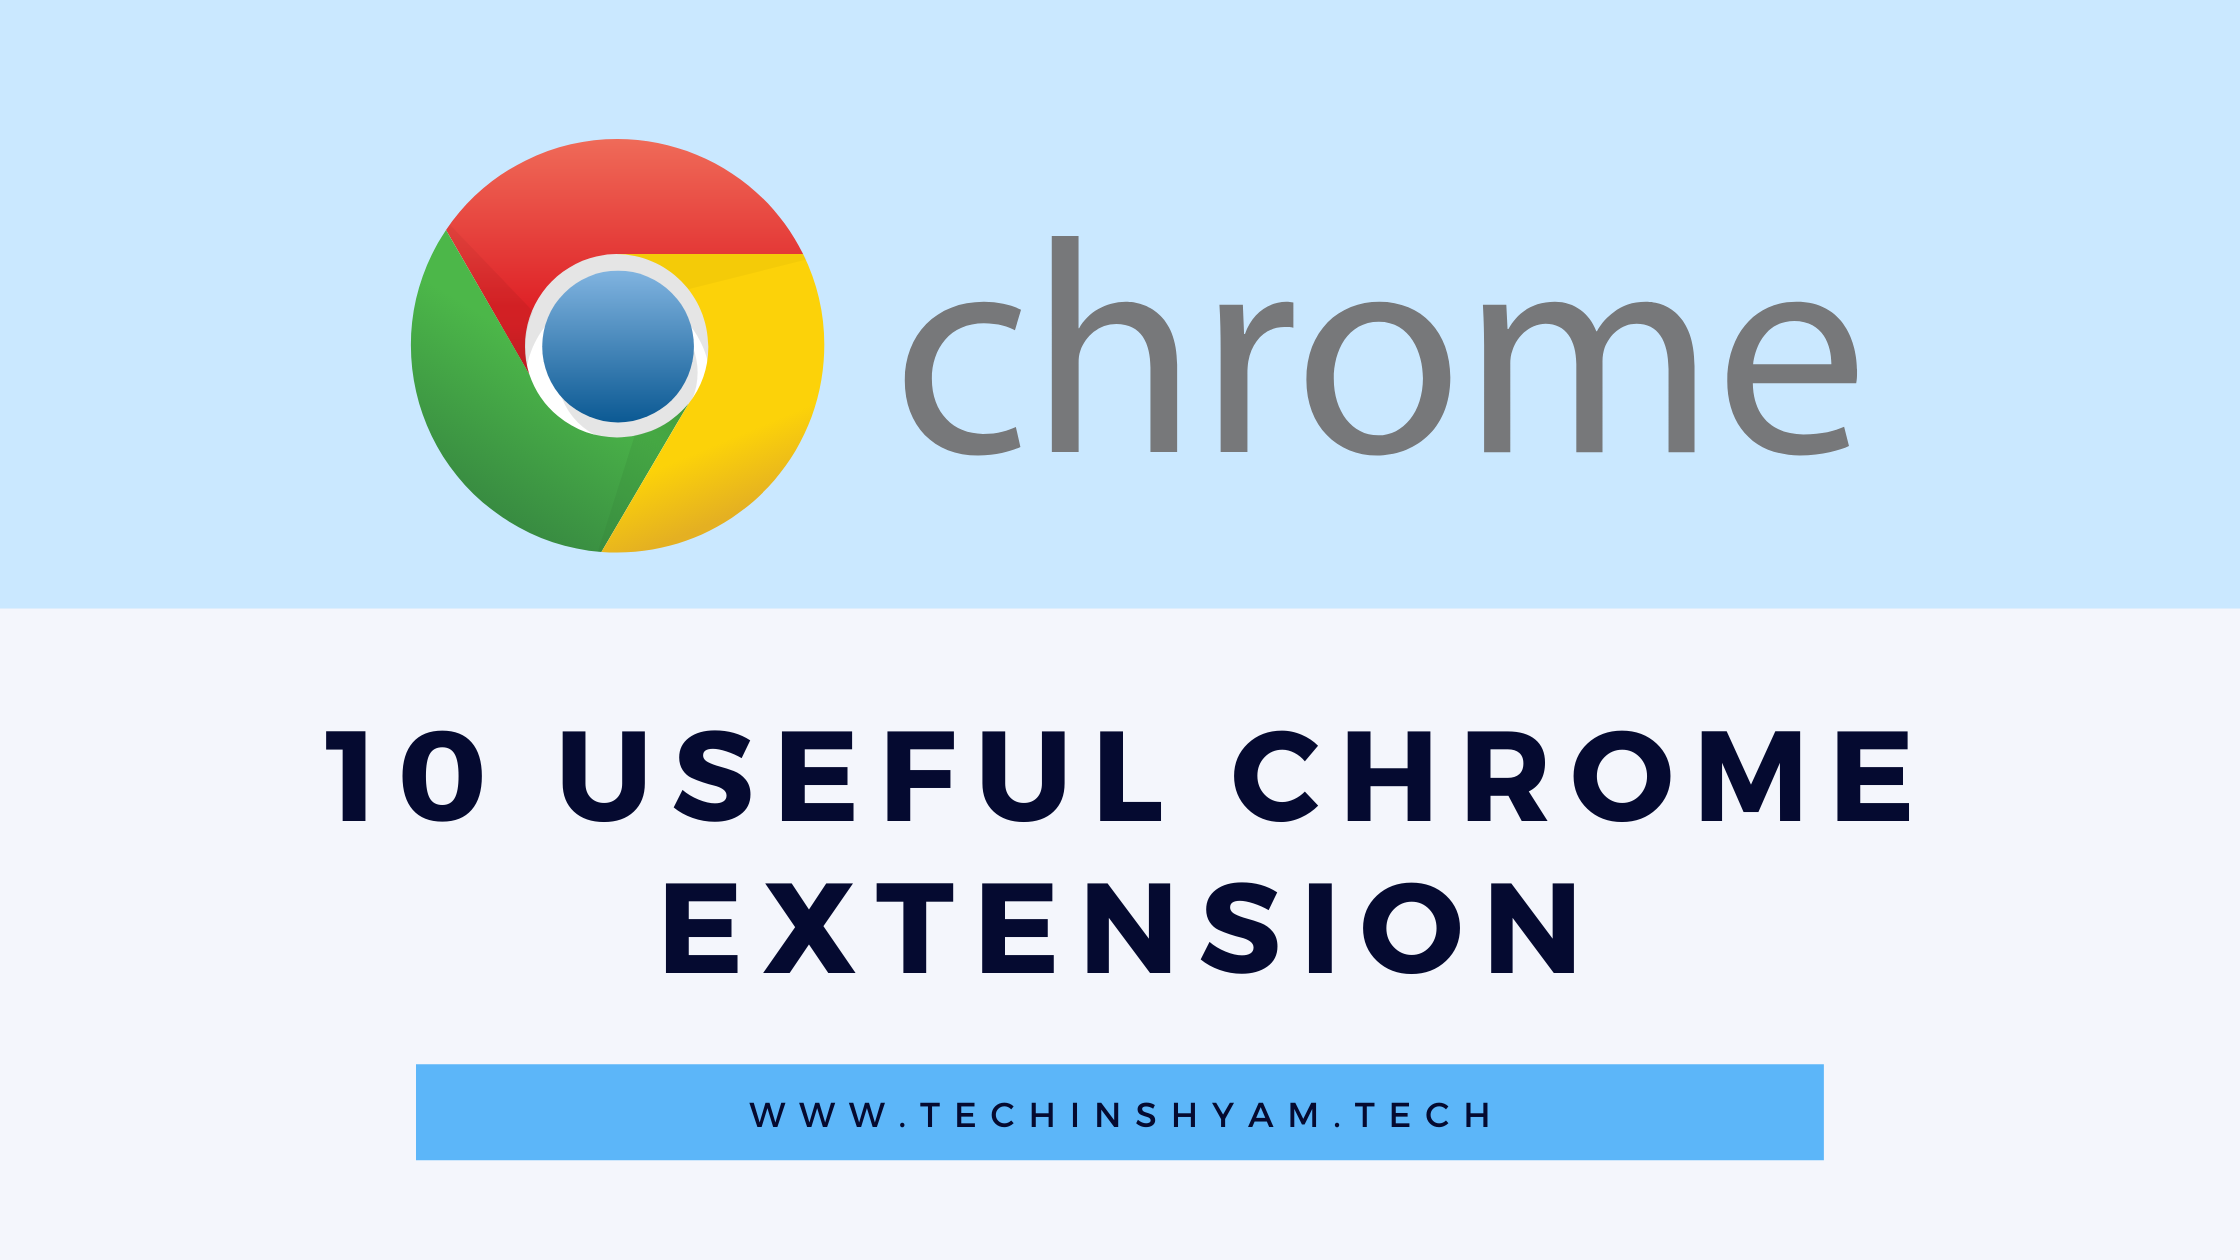 10 useful chrome extension in hindi